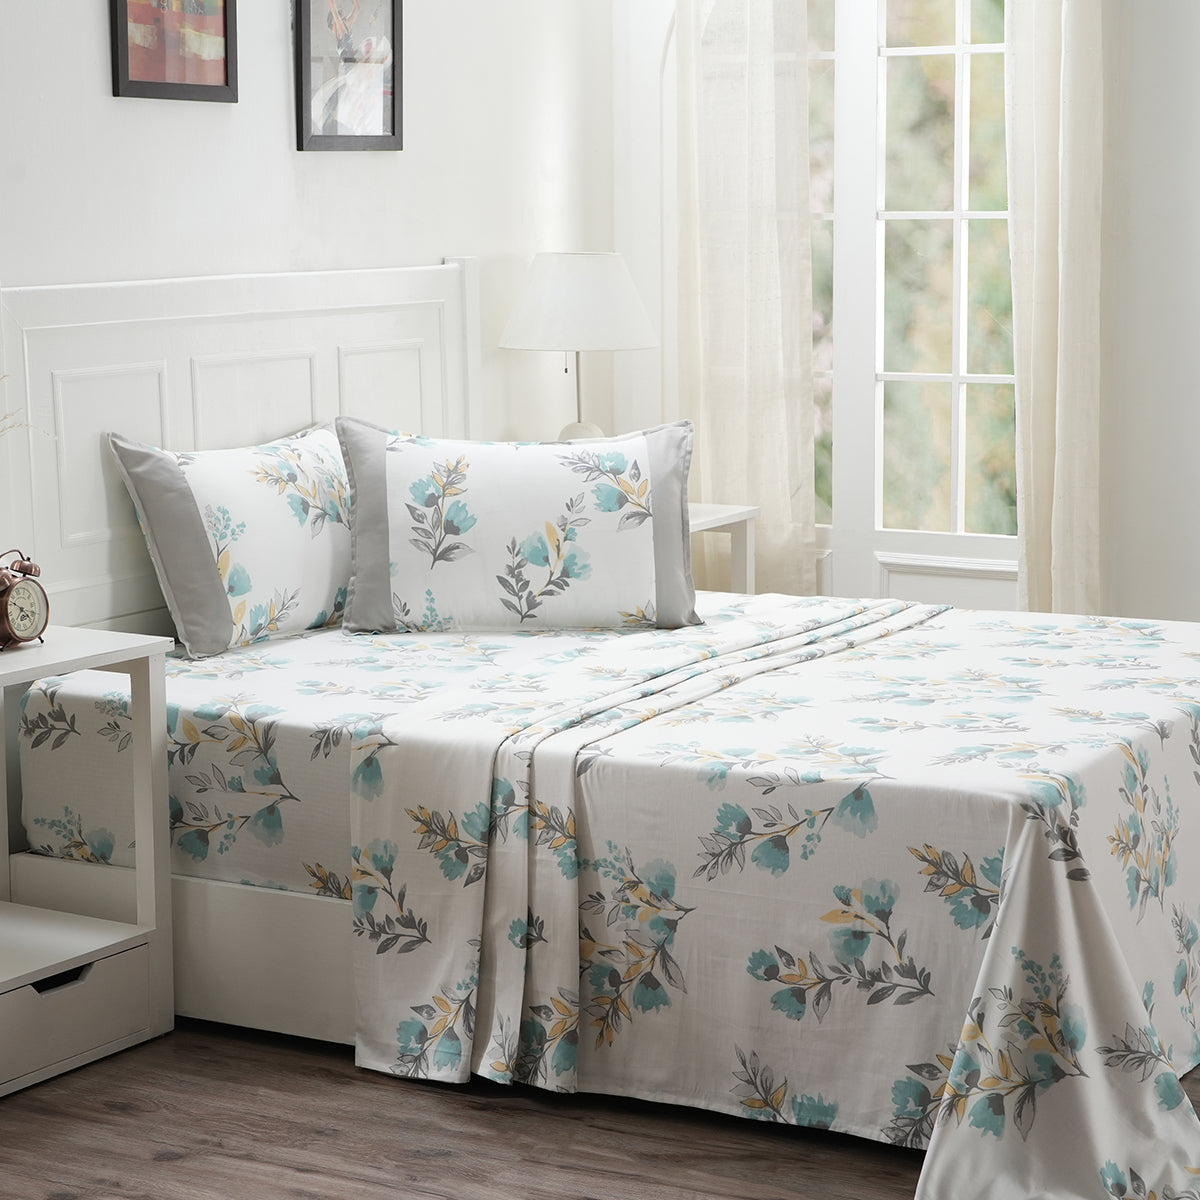 Royal Botanic 200 TC Painted Floral Blue 100% Cotton Bed Sheet With Pillow Case